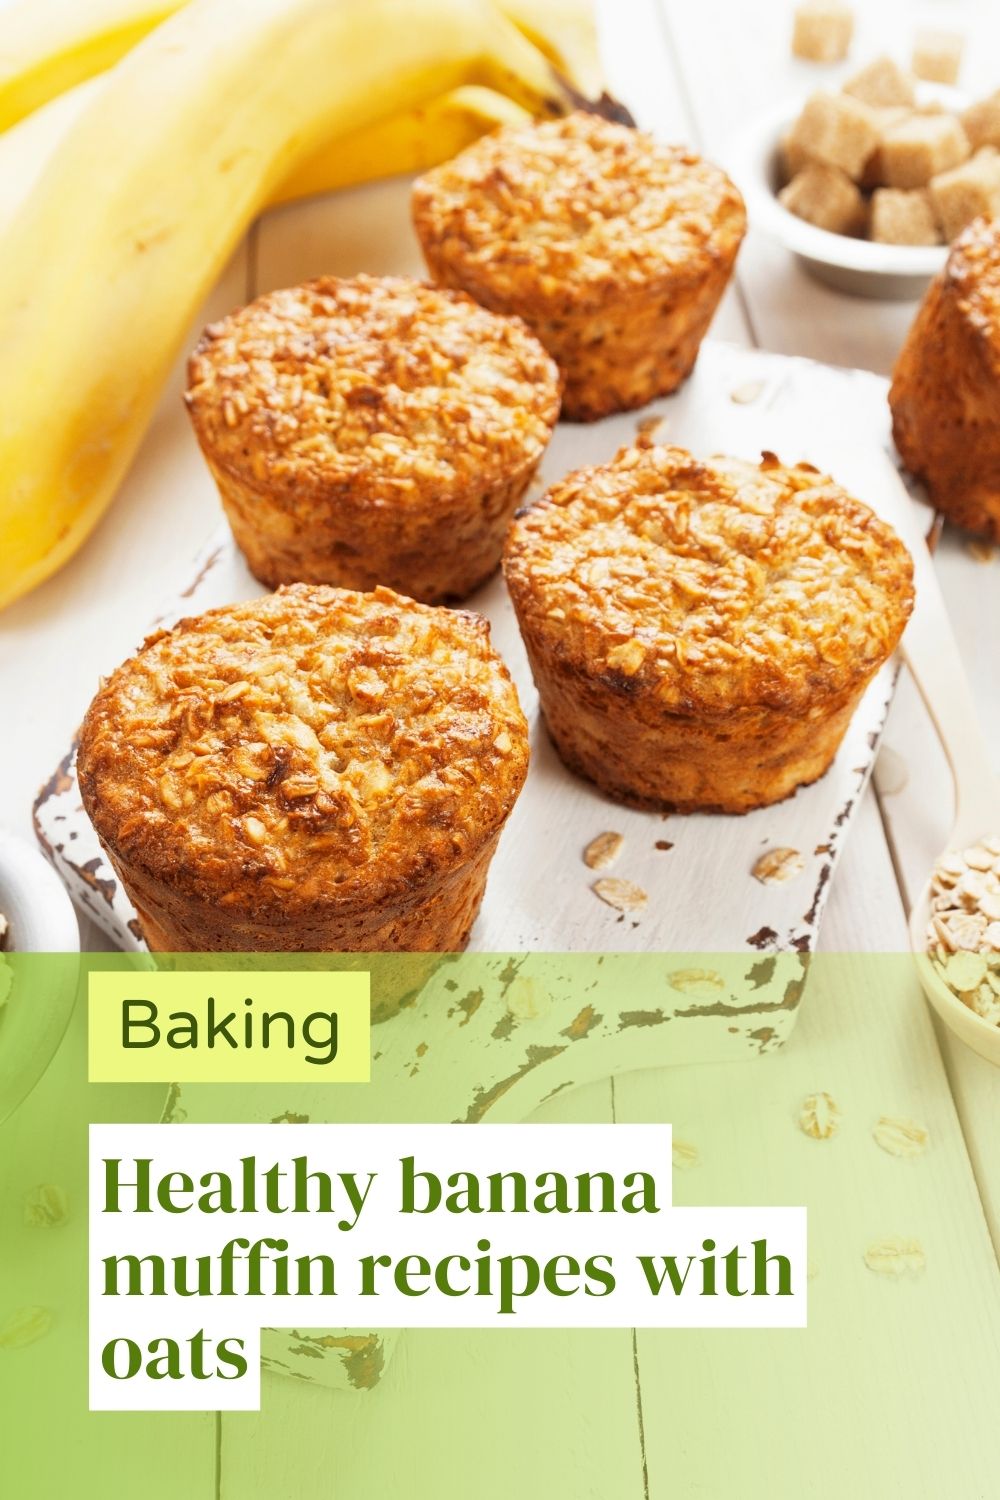 Healthy banana muffin recipes with oats